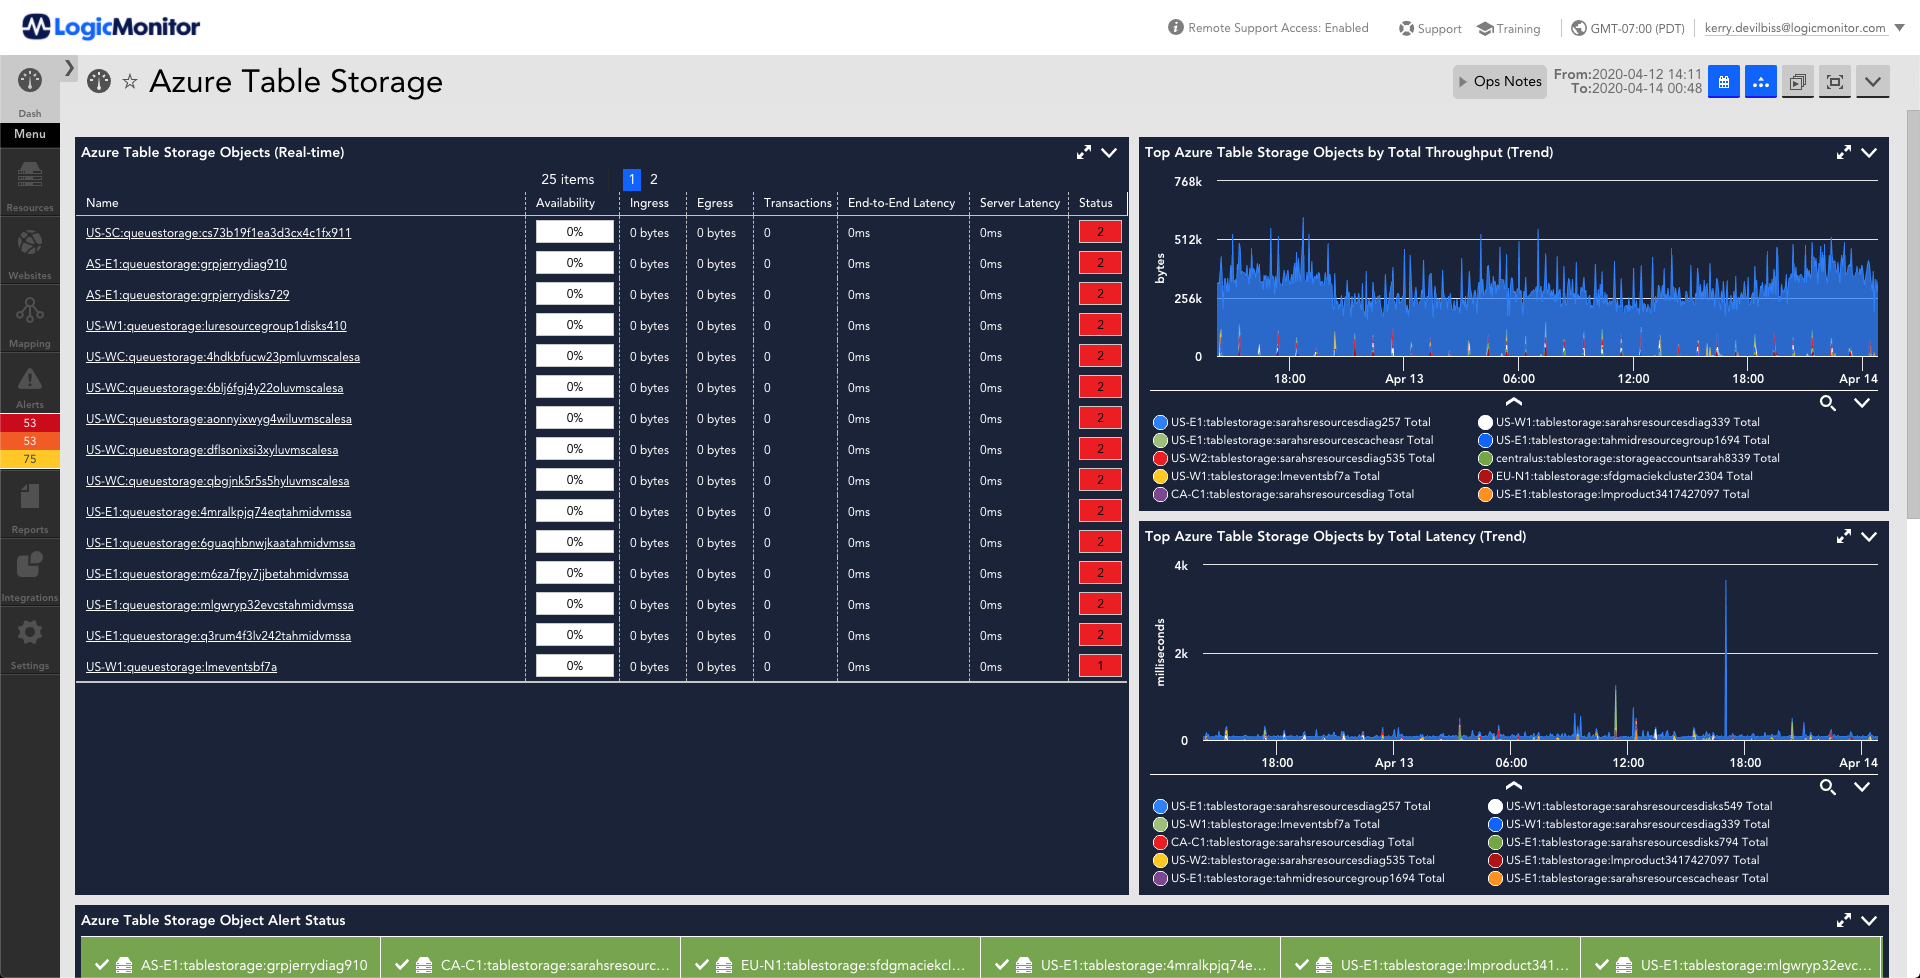 http://This%20dashboard%20provides%20an%20a%20listing%20of%20various%20metrics%20that%20are%20monitored%20for%20Azure%20Table%20Storage.%20The%20metrics%20displayed%20are%20object%20statistics,%20throughput%20over%20time,%20latency%20over%20time,%20alert%20status